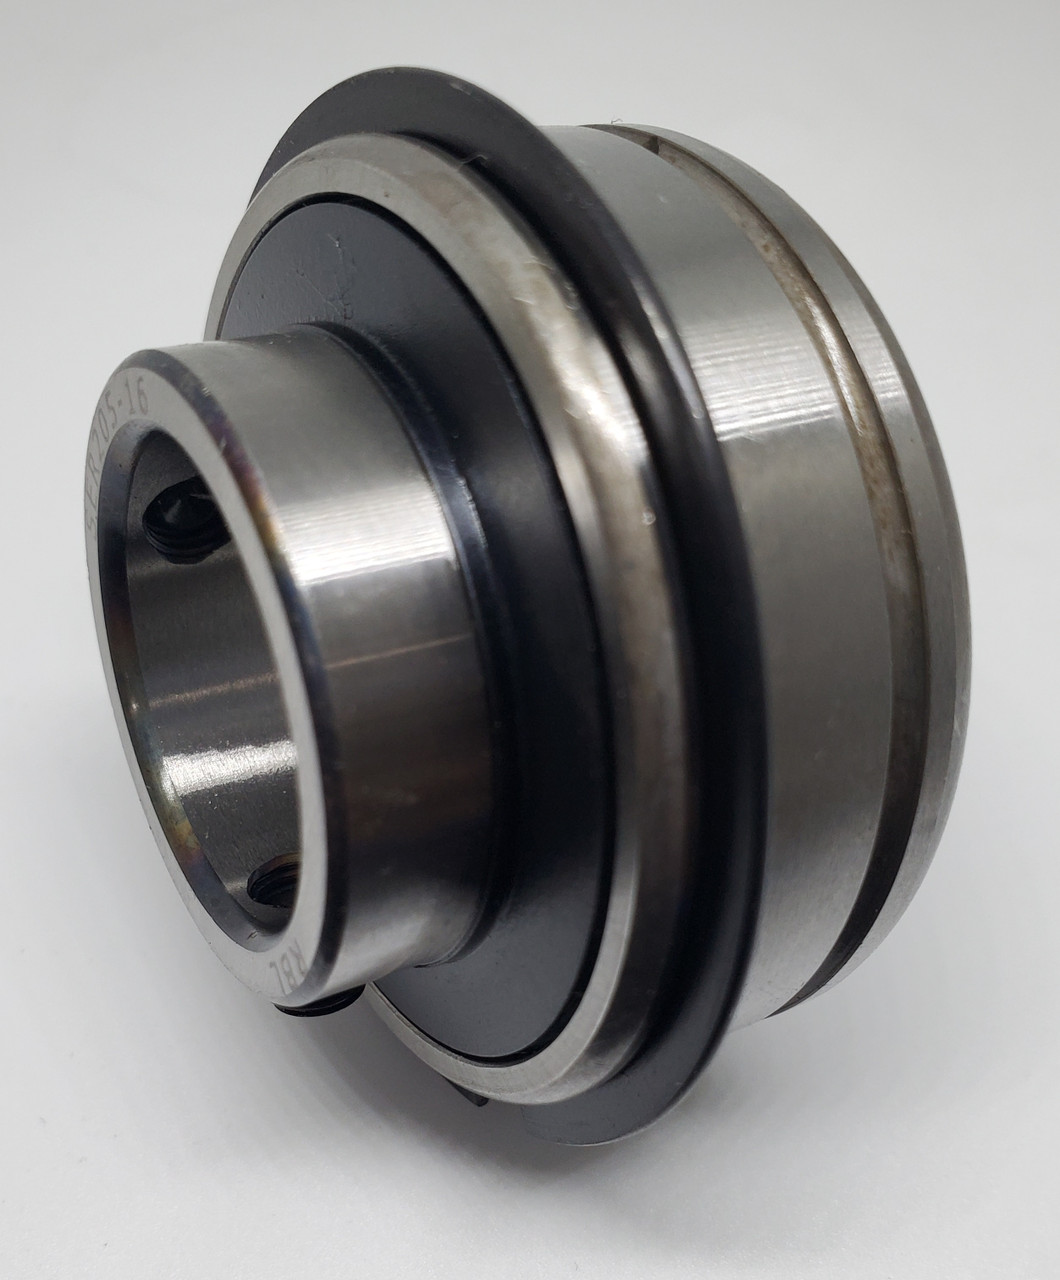 7612DLG GENERIC 0.75x1.75x0.625/1.09 Normal duty bearing insert with a parallel outer race, snap ring and groove with grubscrew locking - Imperial Thumbnail